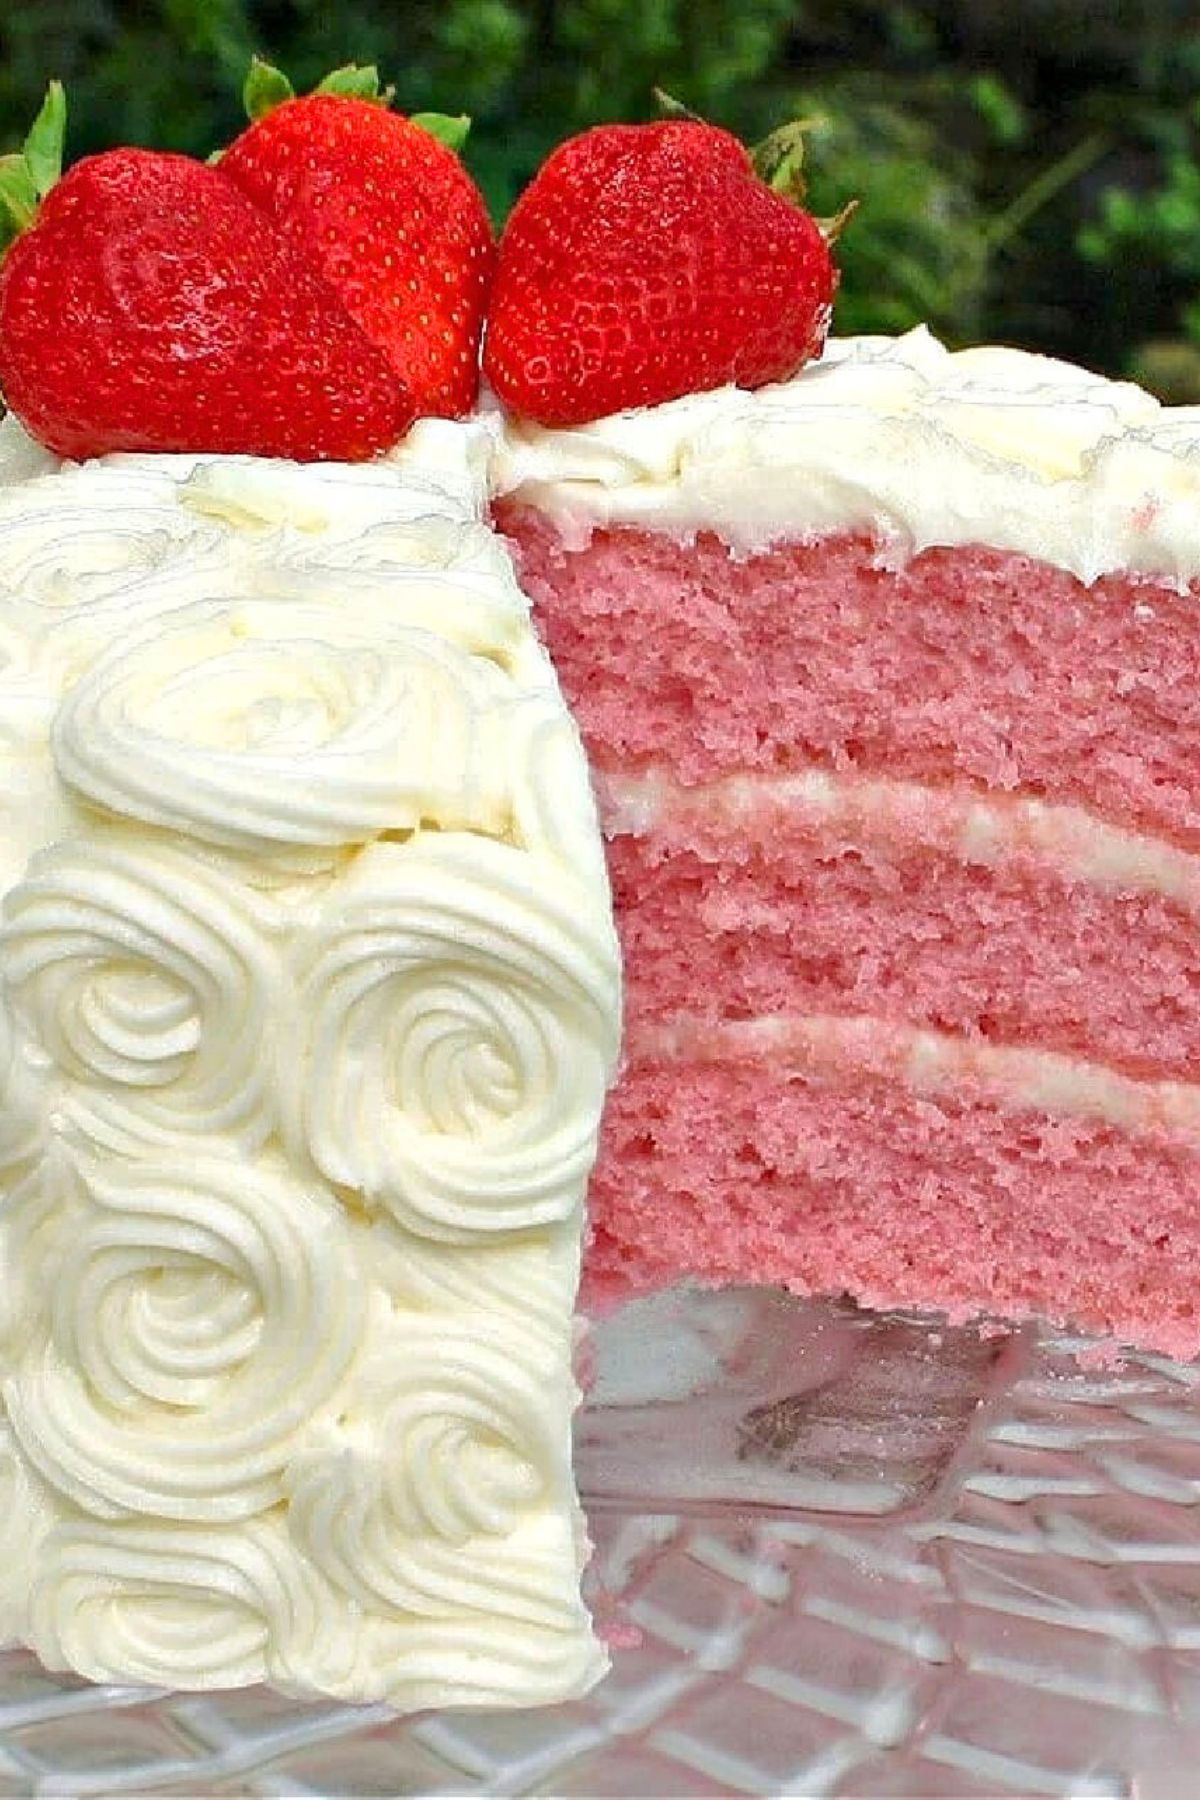 Closeup of a sliced strawberry cake, frosted with cream cheese frosting on a glass pedestal.